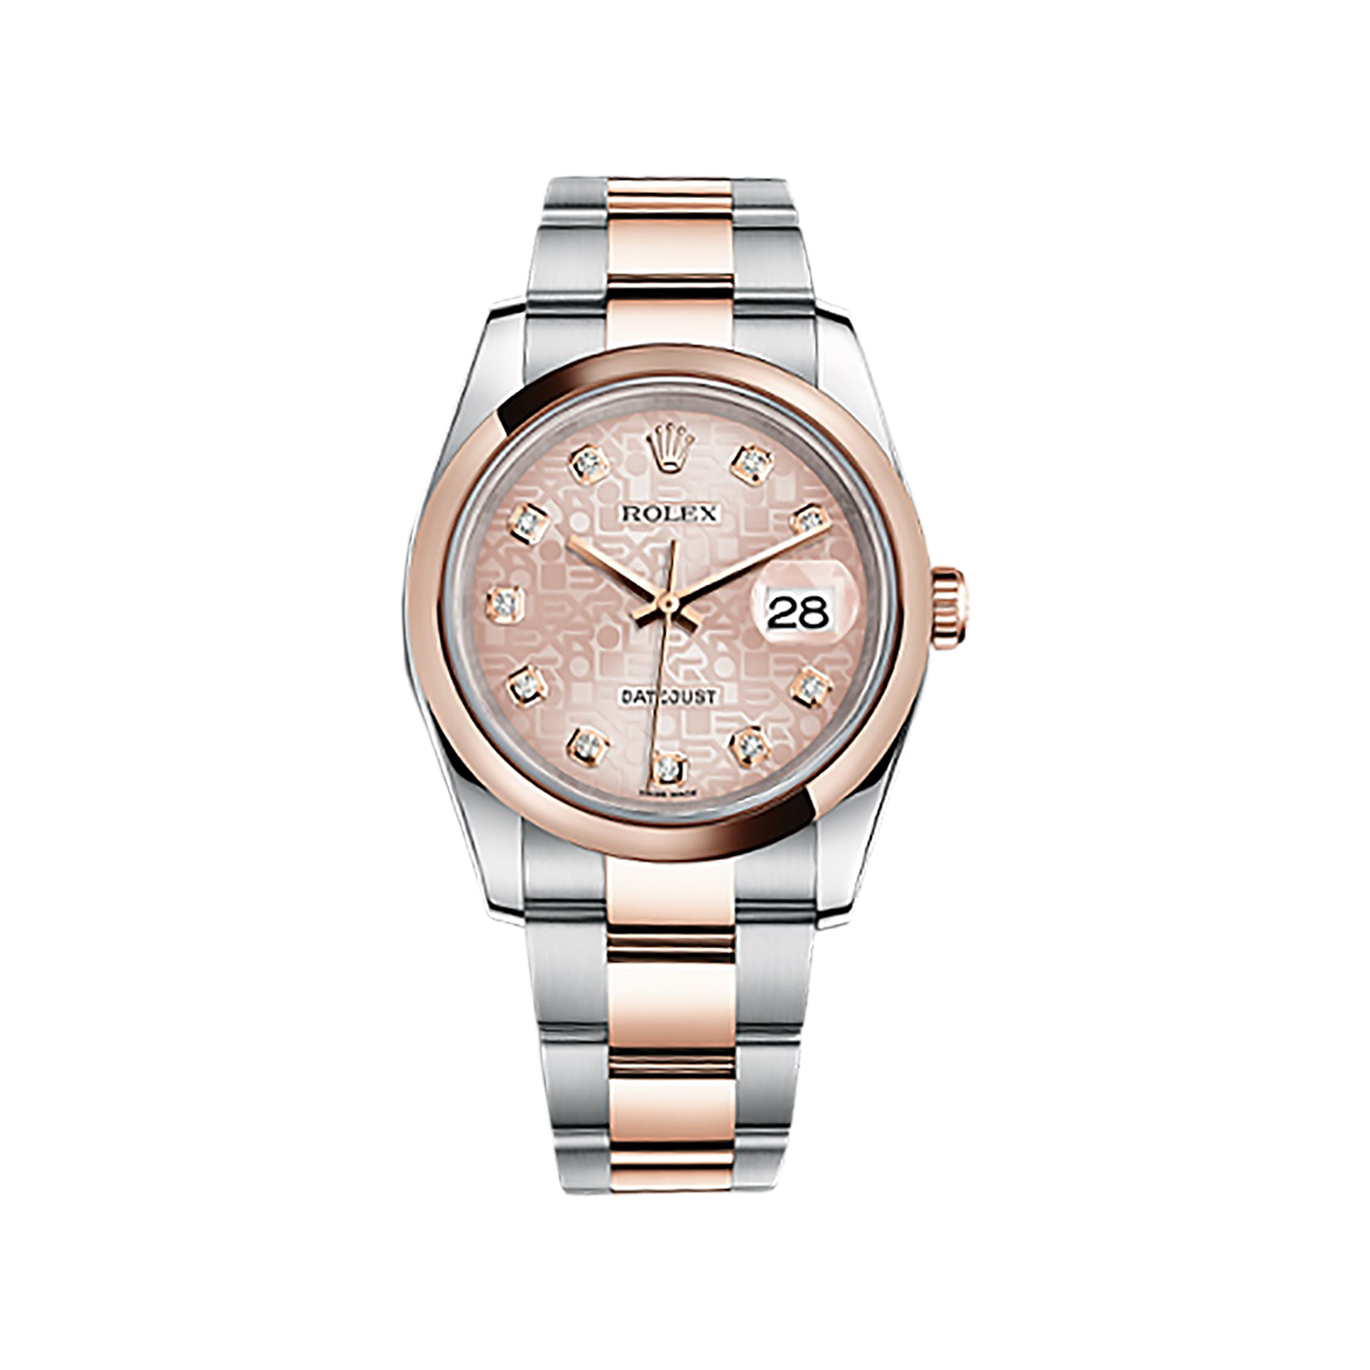 Datejust 36 116201 Rose Gold & Stainless Steel Watch (Pink Jubilee Design Set with Diamonds)